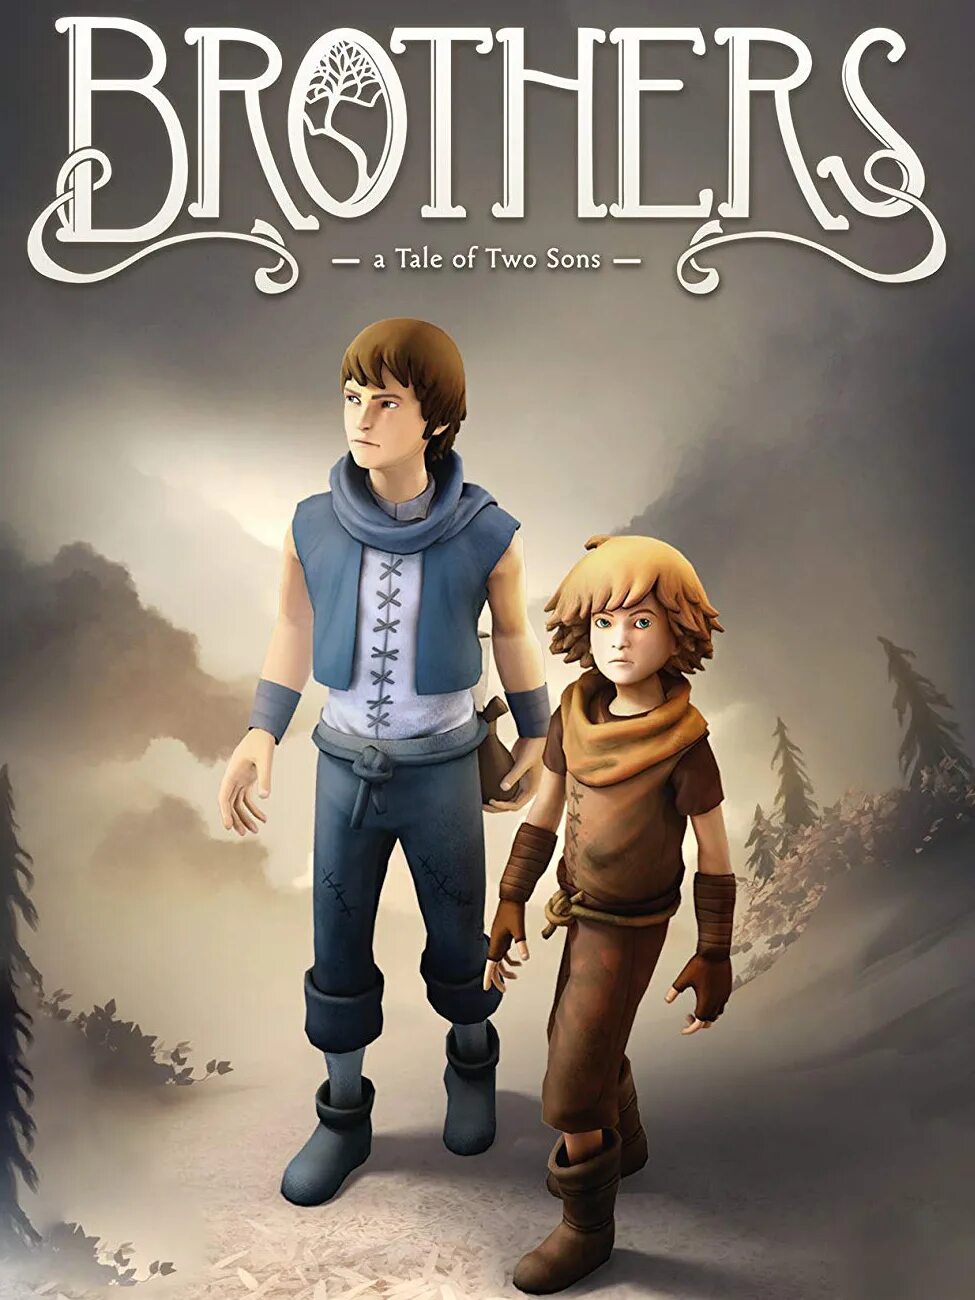 A tale of two sons ps4. Xbox игра brothers: a Tale of two sons. Brothers: a Tale of two sons (2013). Brothers: a Tale of two sons обложка. Игра брат.